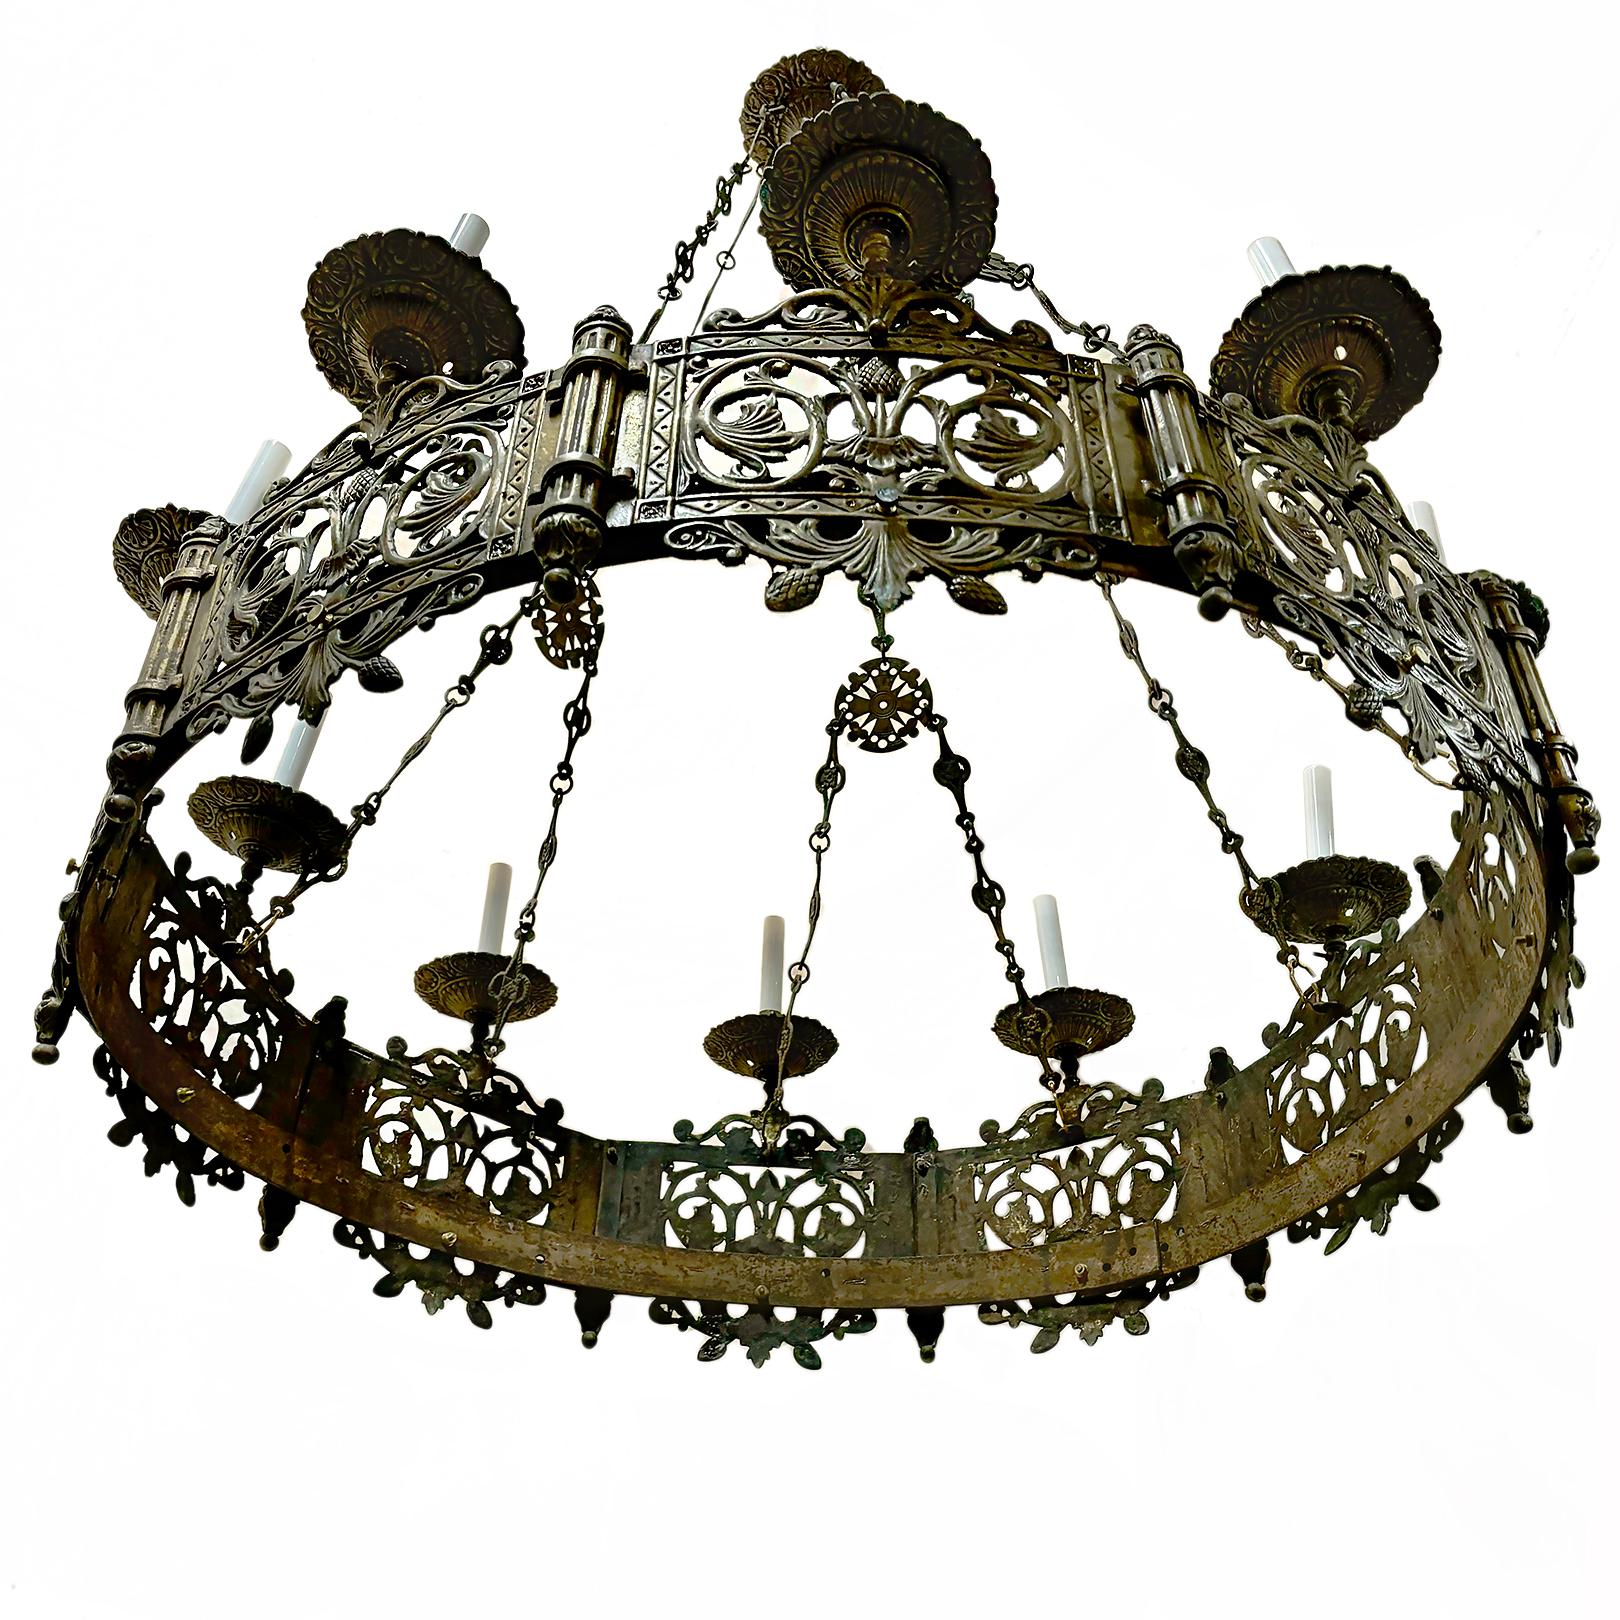 Pair of circa 1900 English ten-light bronze chandeliers with thistle & foliage motif on body and original patina. Sold individually.

Measurements:
Diameter: 41